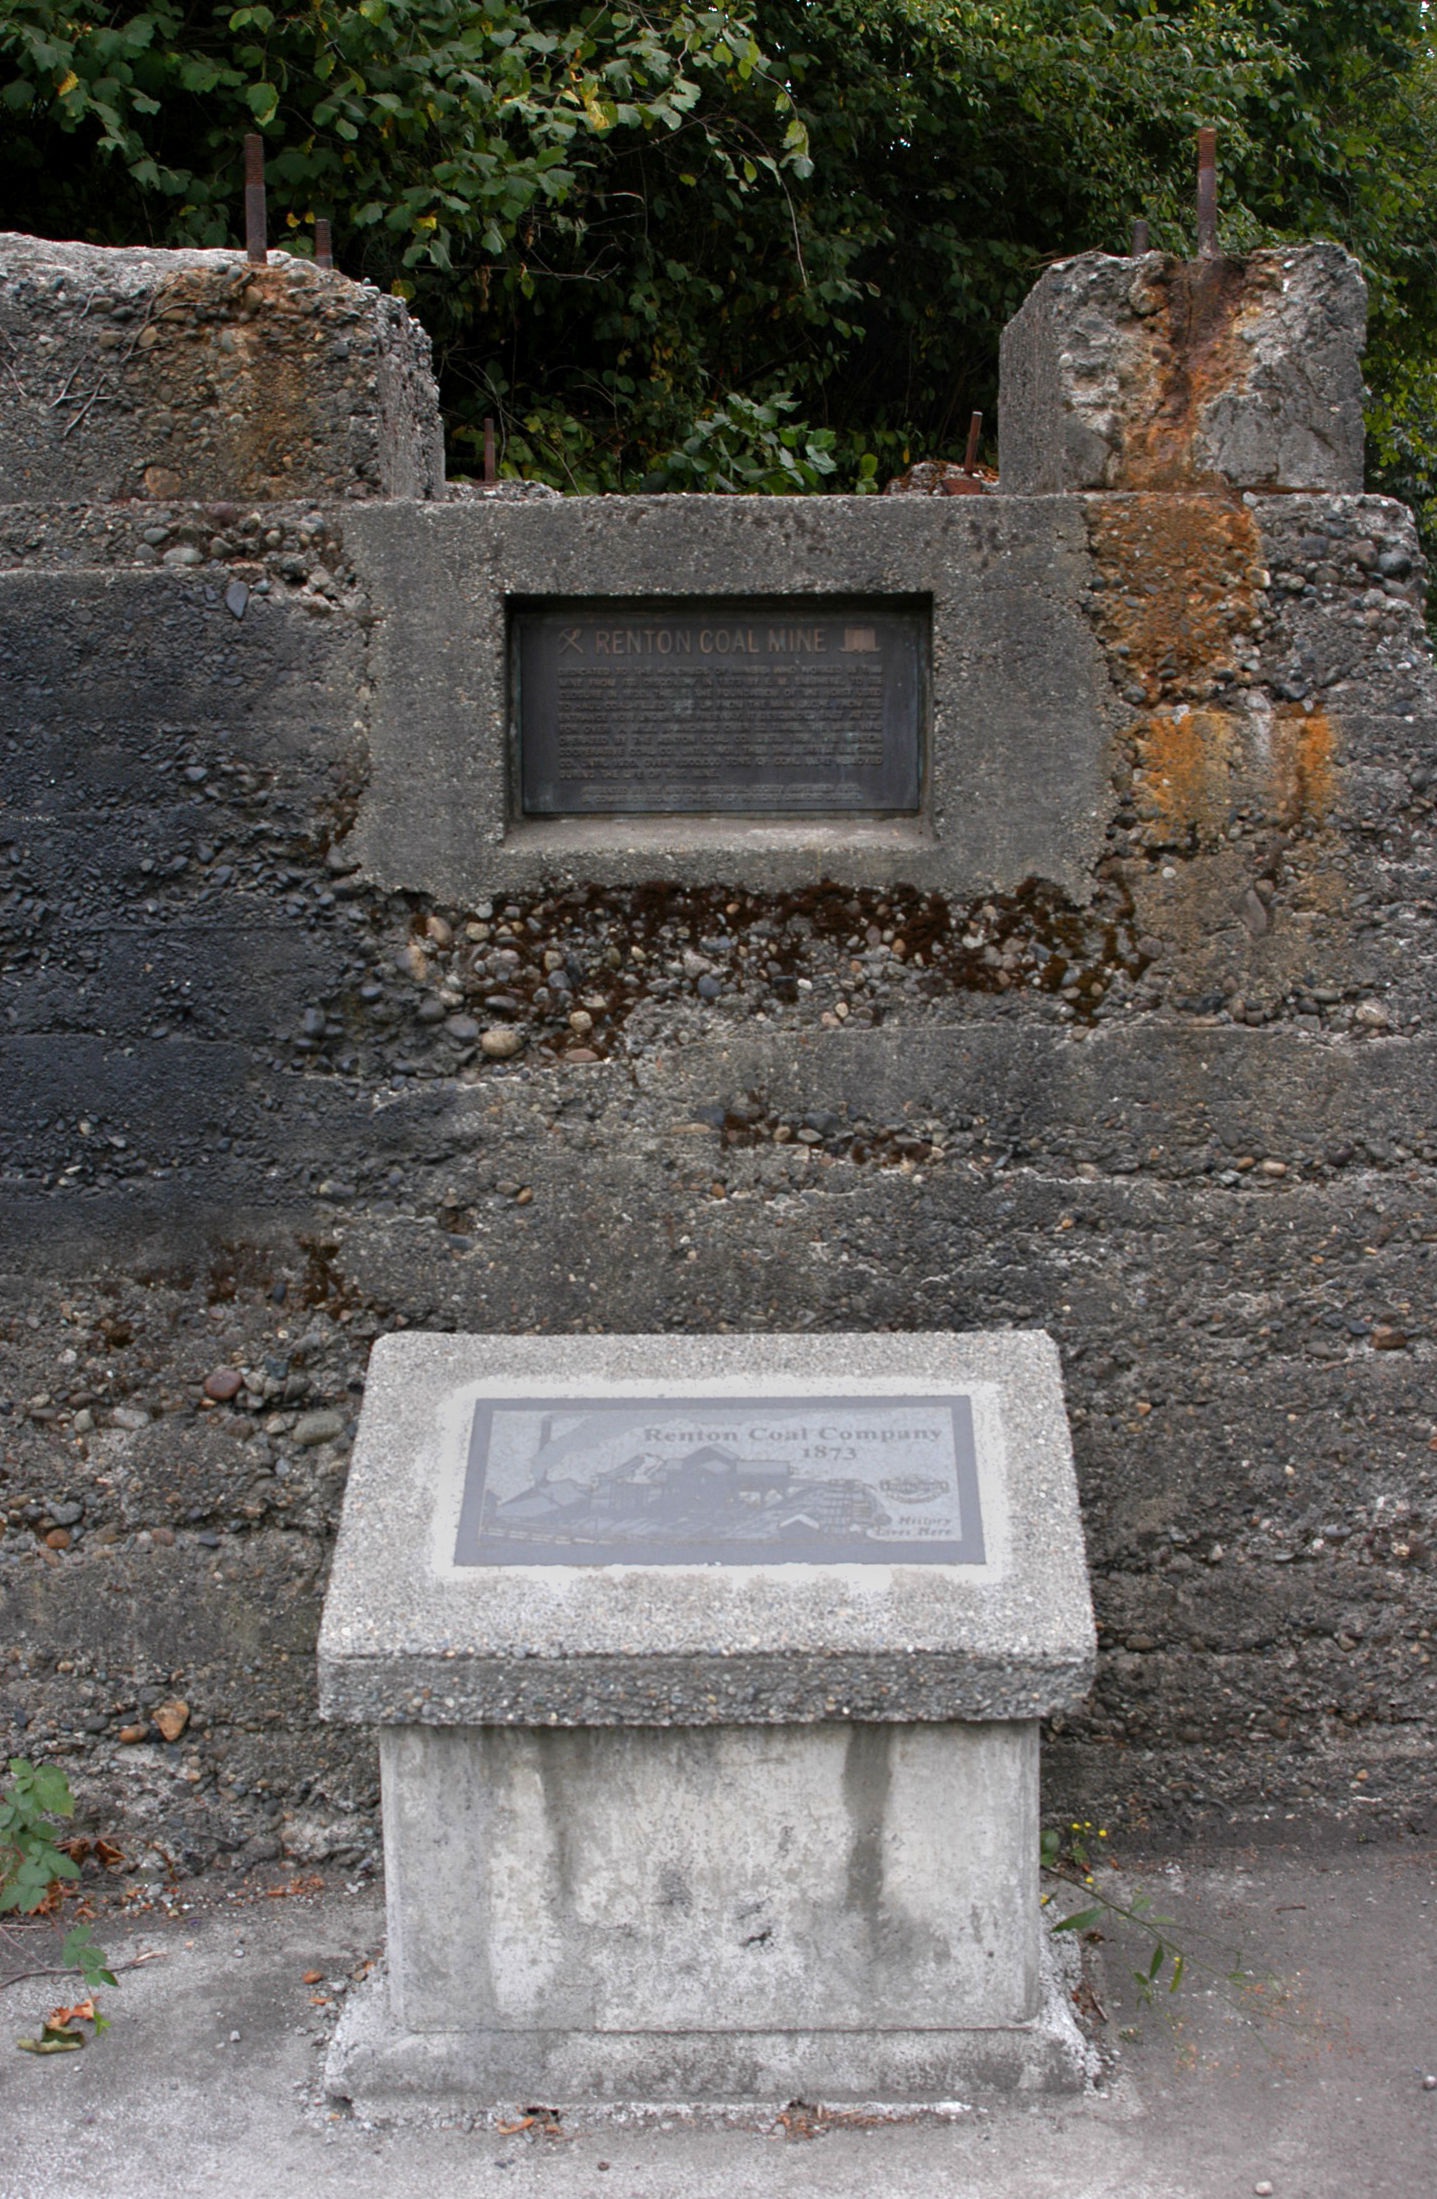 Historical plaques